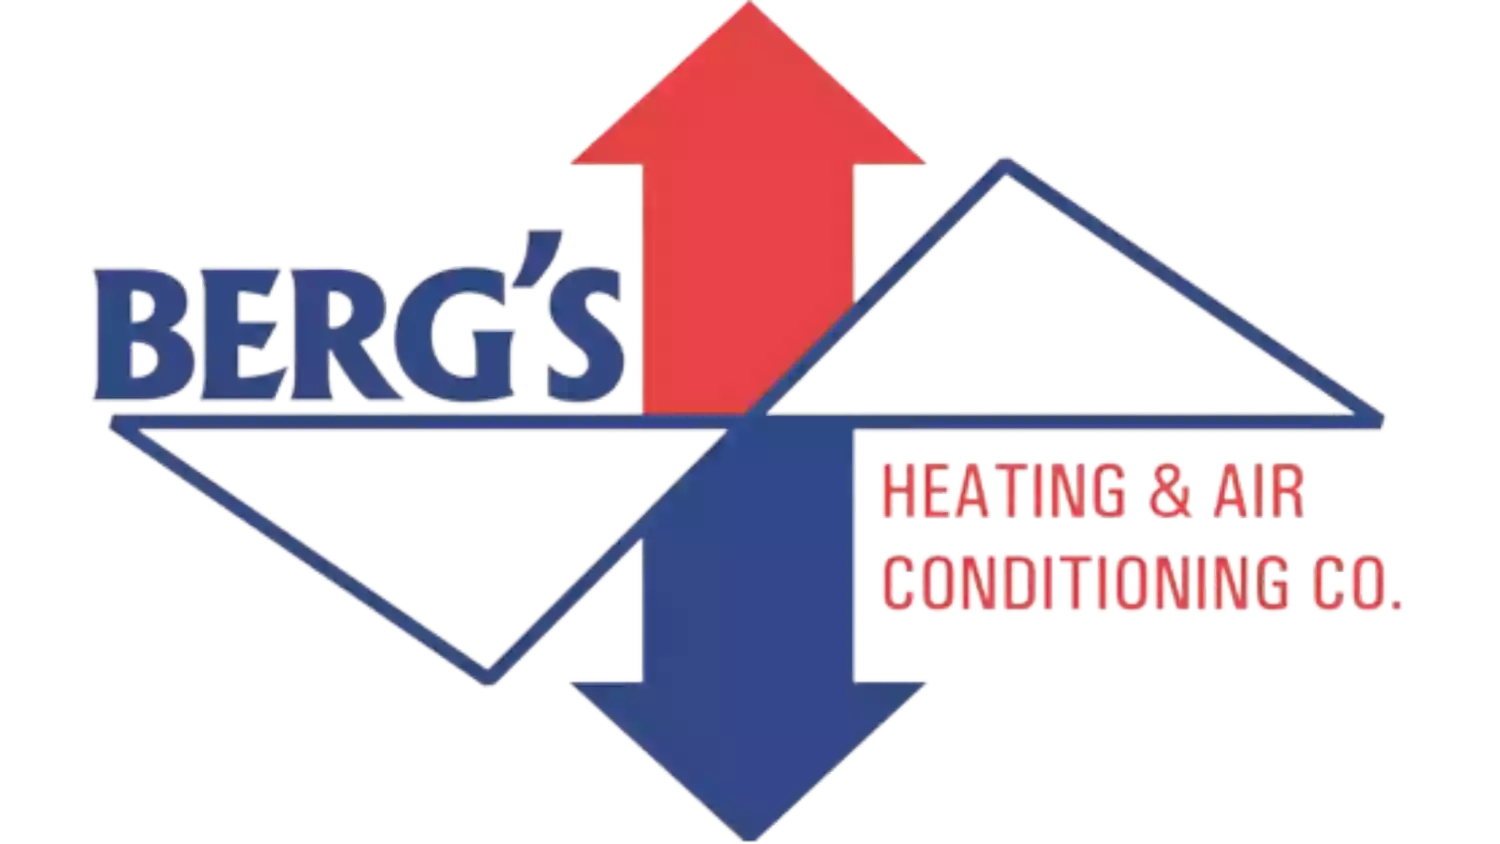 Berg's Heating & Air Conditioning Co.